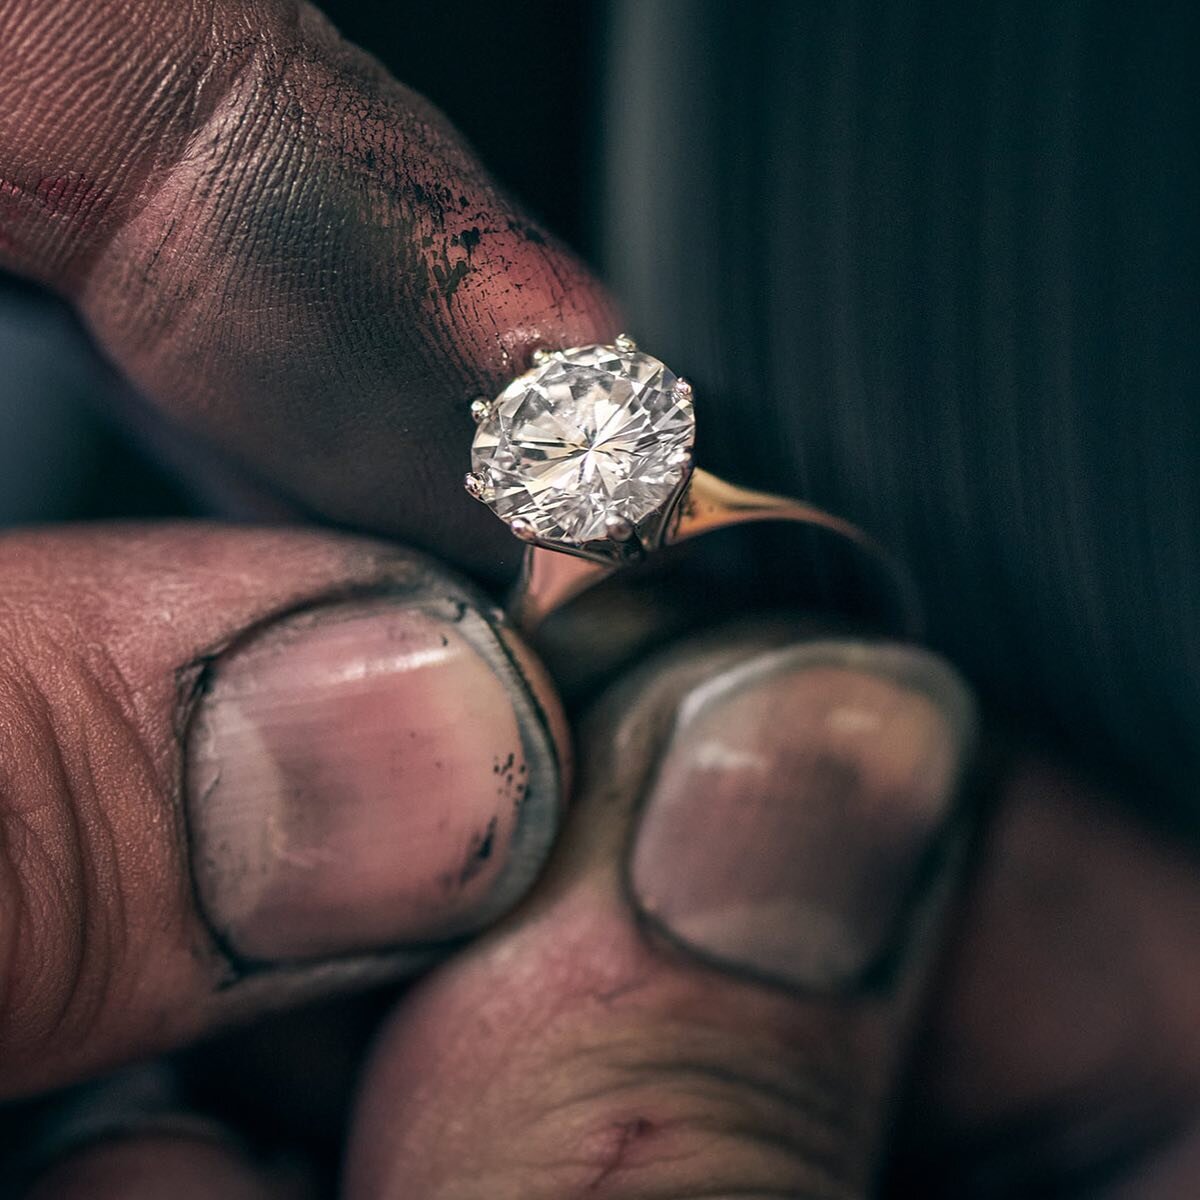 Last shoot before Christmas was a few hours in at #bellandbrunt jewellers to create some manufacturing and staff pics. That &lsquo;rock&rsquo; getting a polish by James was something to behold.. I call that shot &lsquo;Beauty and the Beast!&rsquo; Ca